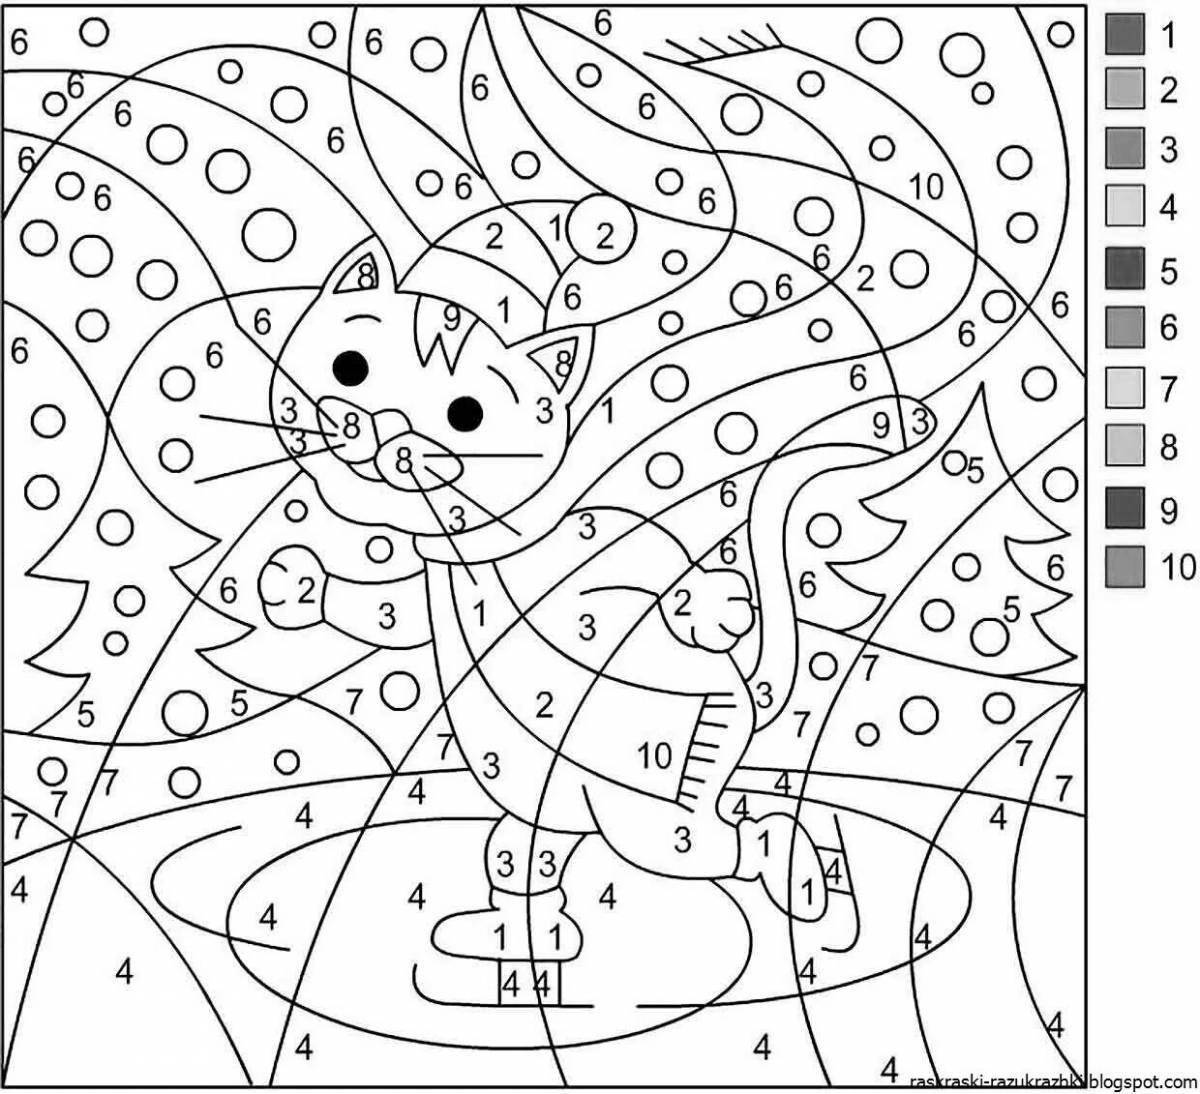 Attention-grabbing coloring book for 7-8 year olds